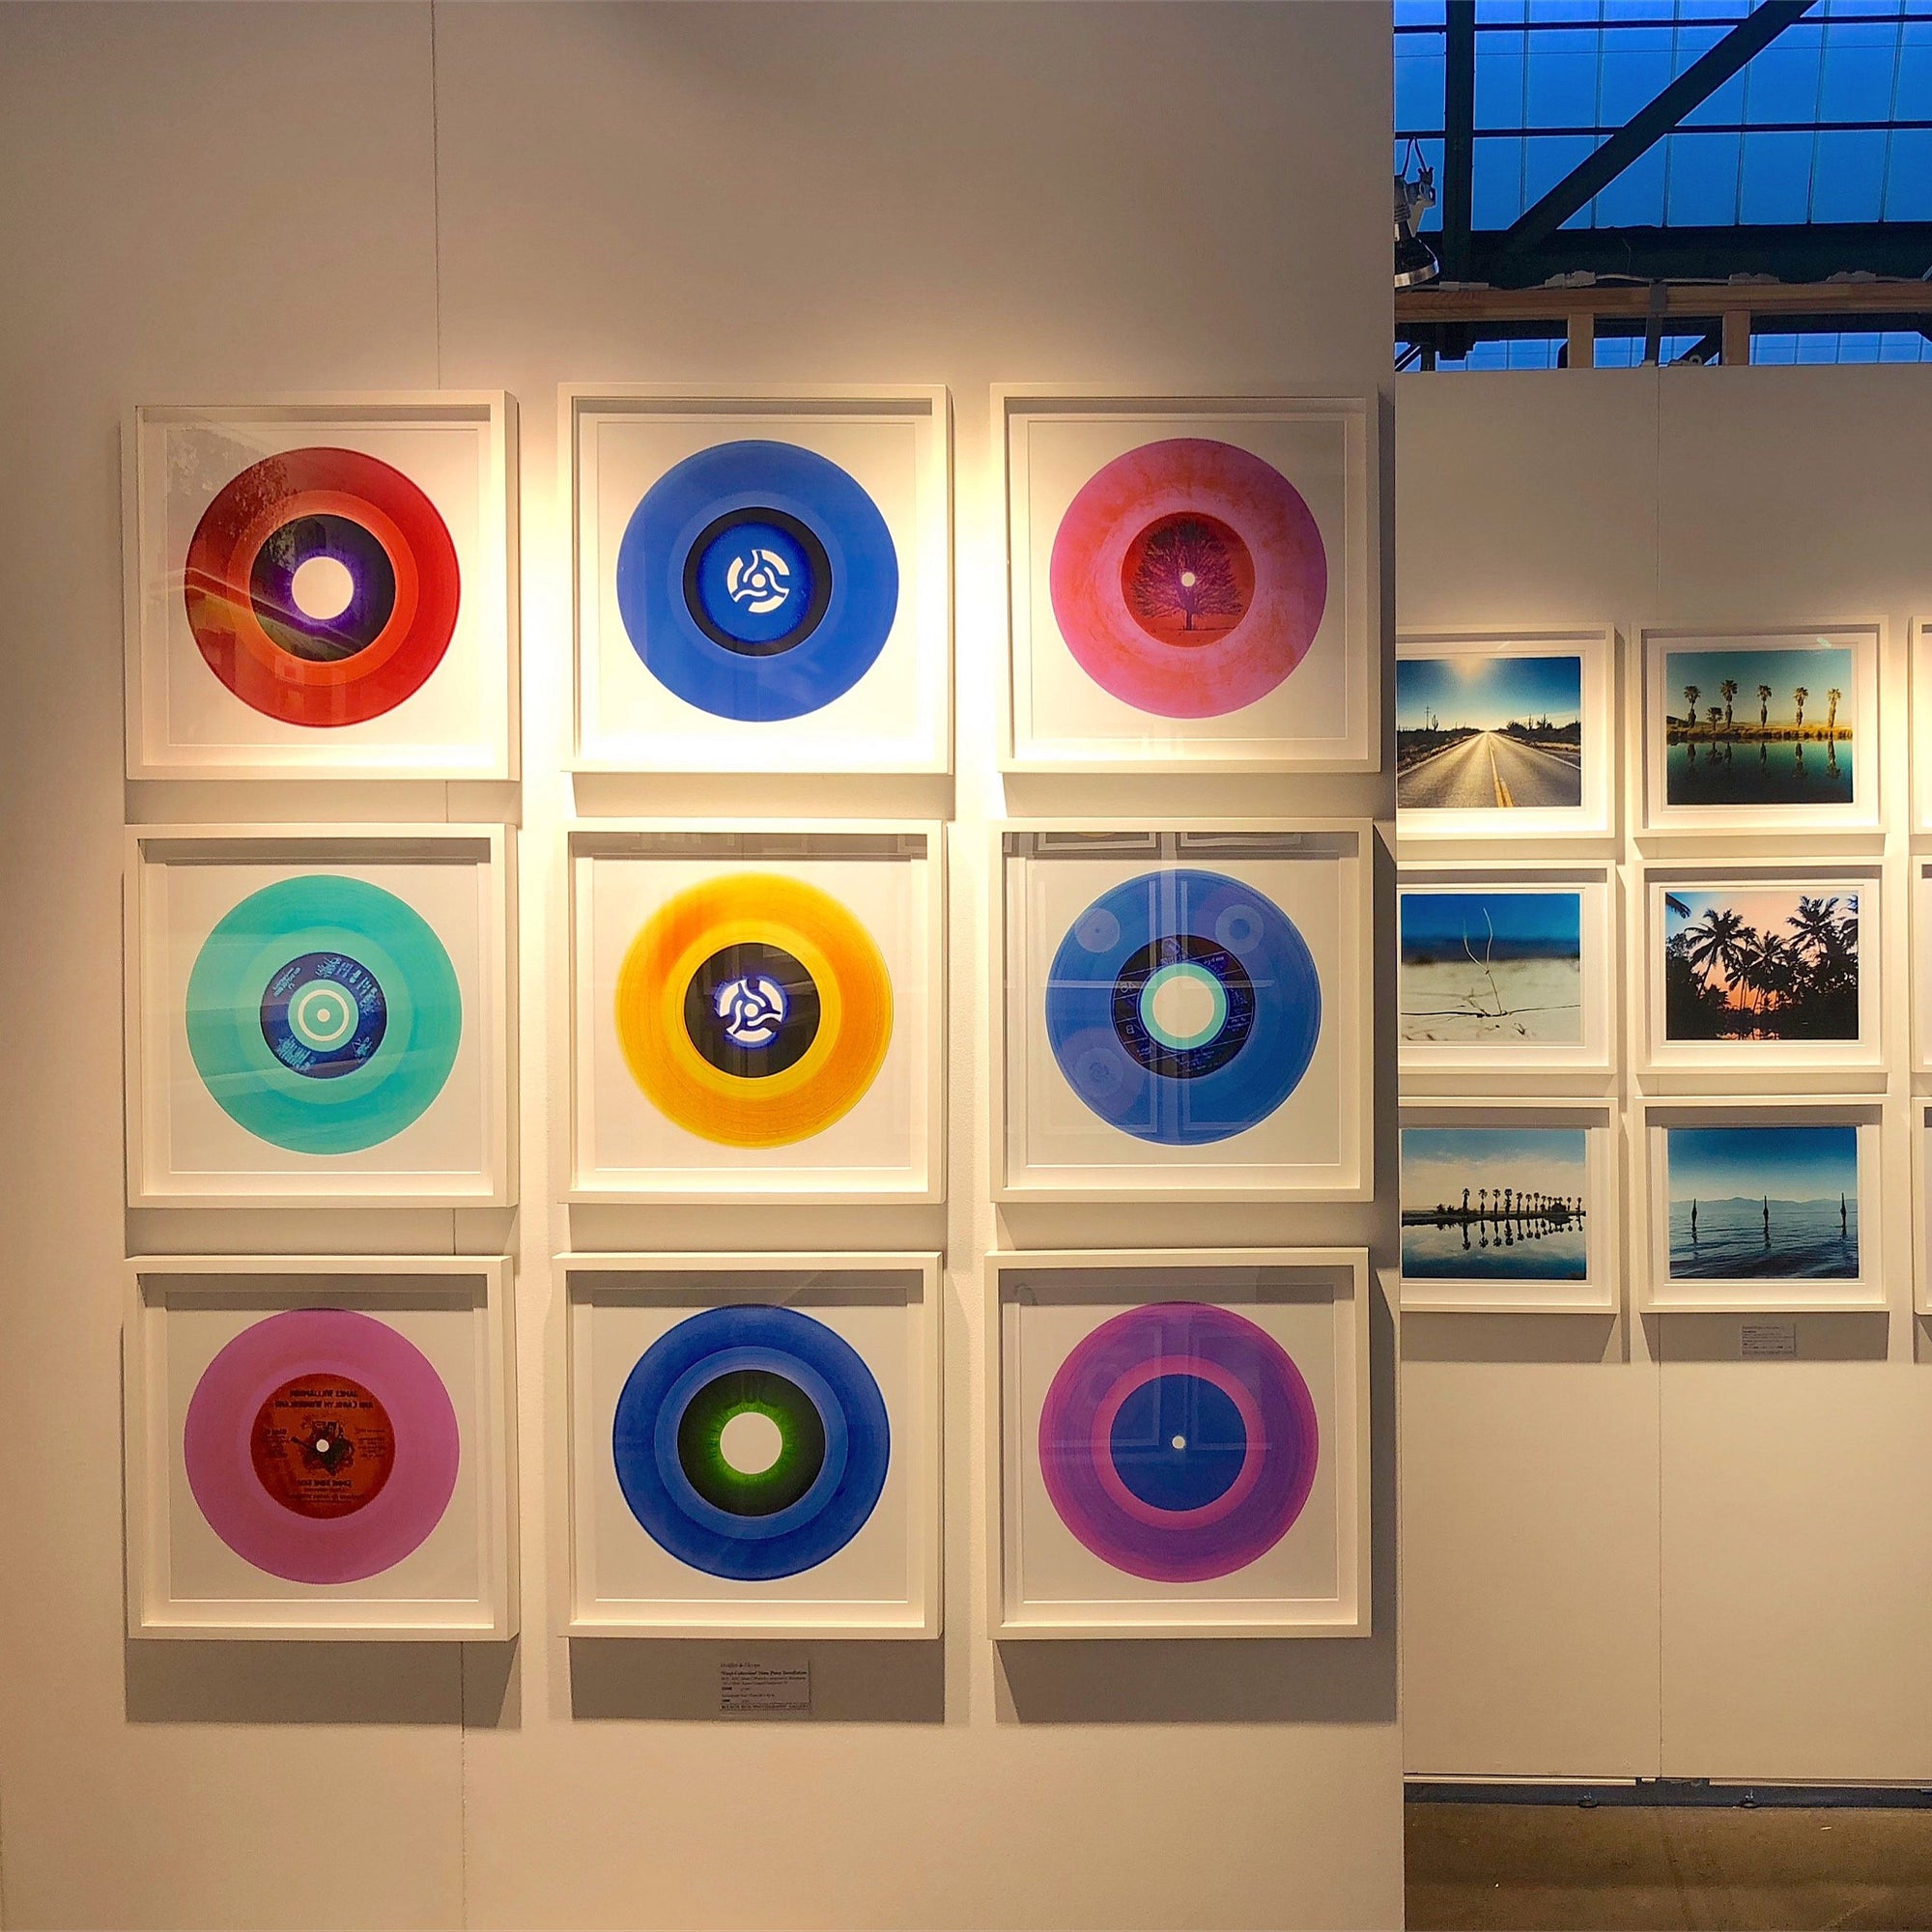 Acclaimed contemporary photographers, Richard Heeps and Natasha Heidler have collaborated to make this beautifully mesmerising collection. A celebration of the vinyl record and analogue technology, which reflects the artists practice within photography.